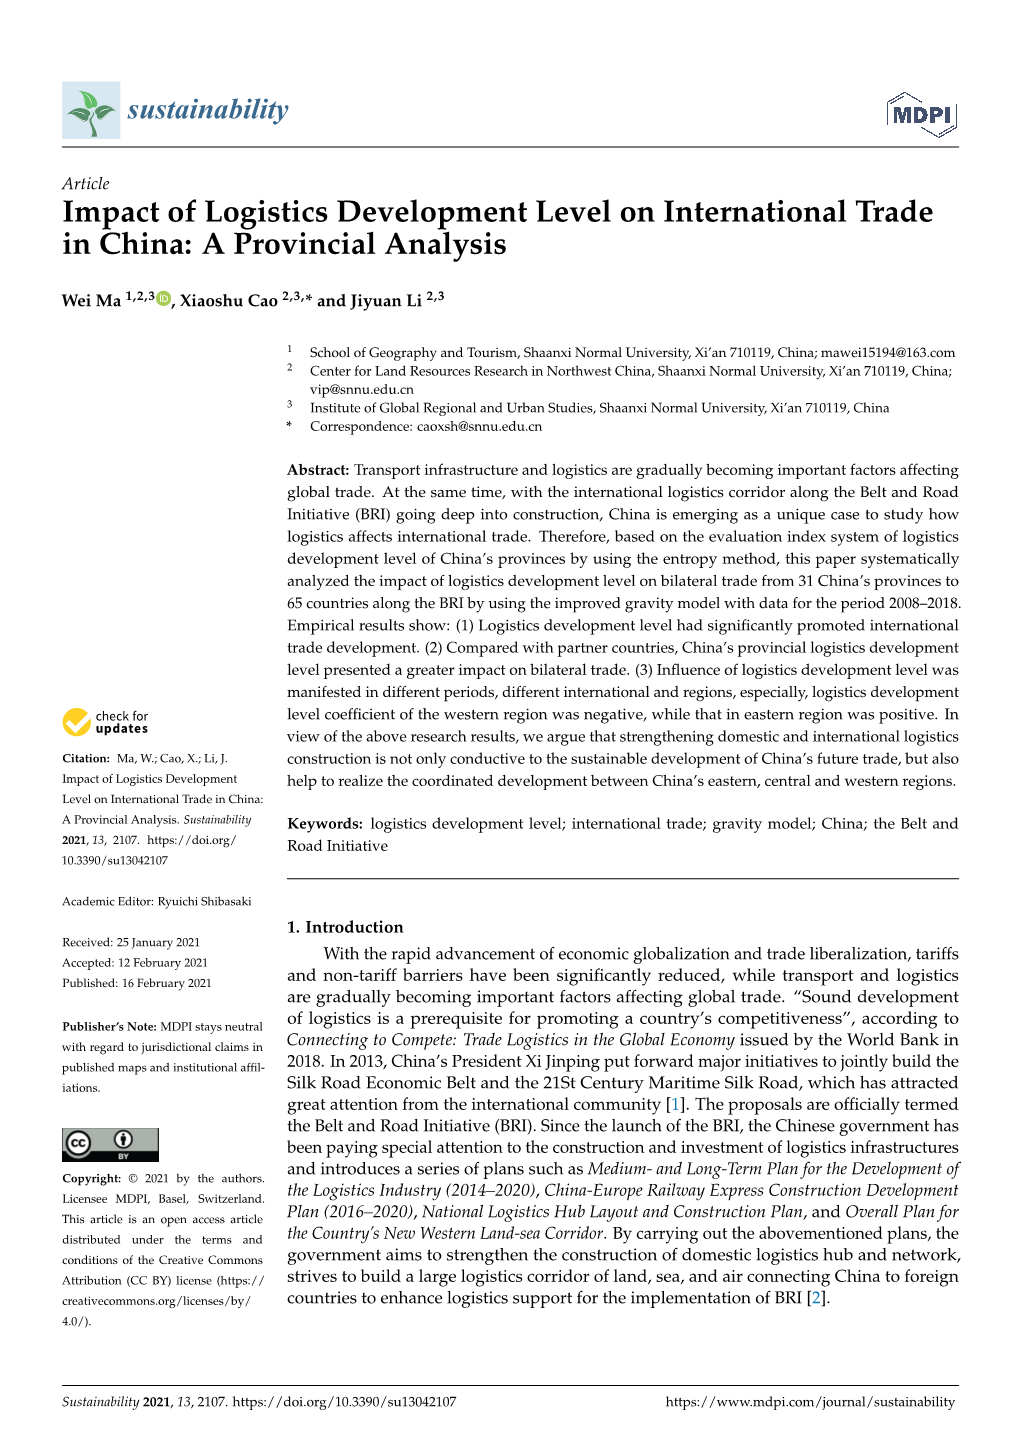 Impact of Logistics Development Level on International Trade in China: a Provincial Analysis